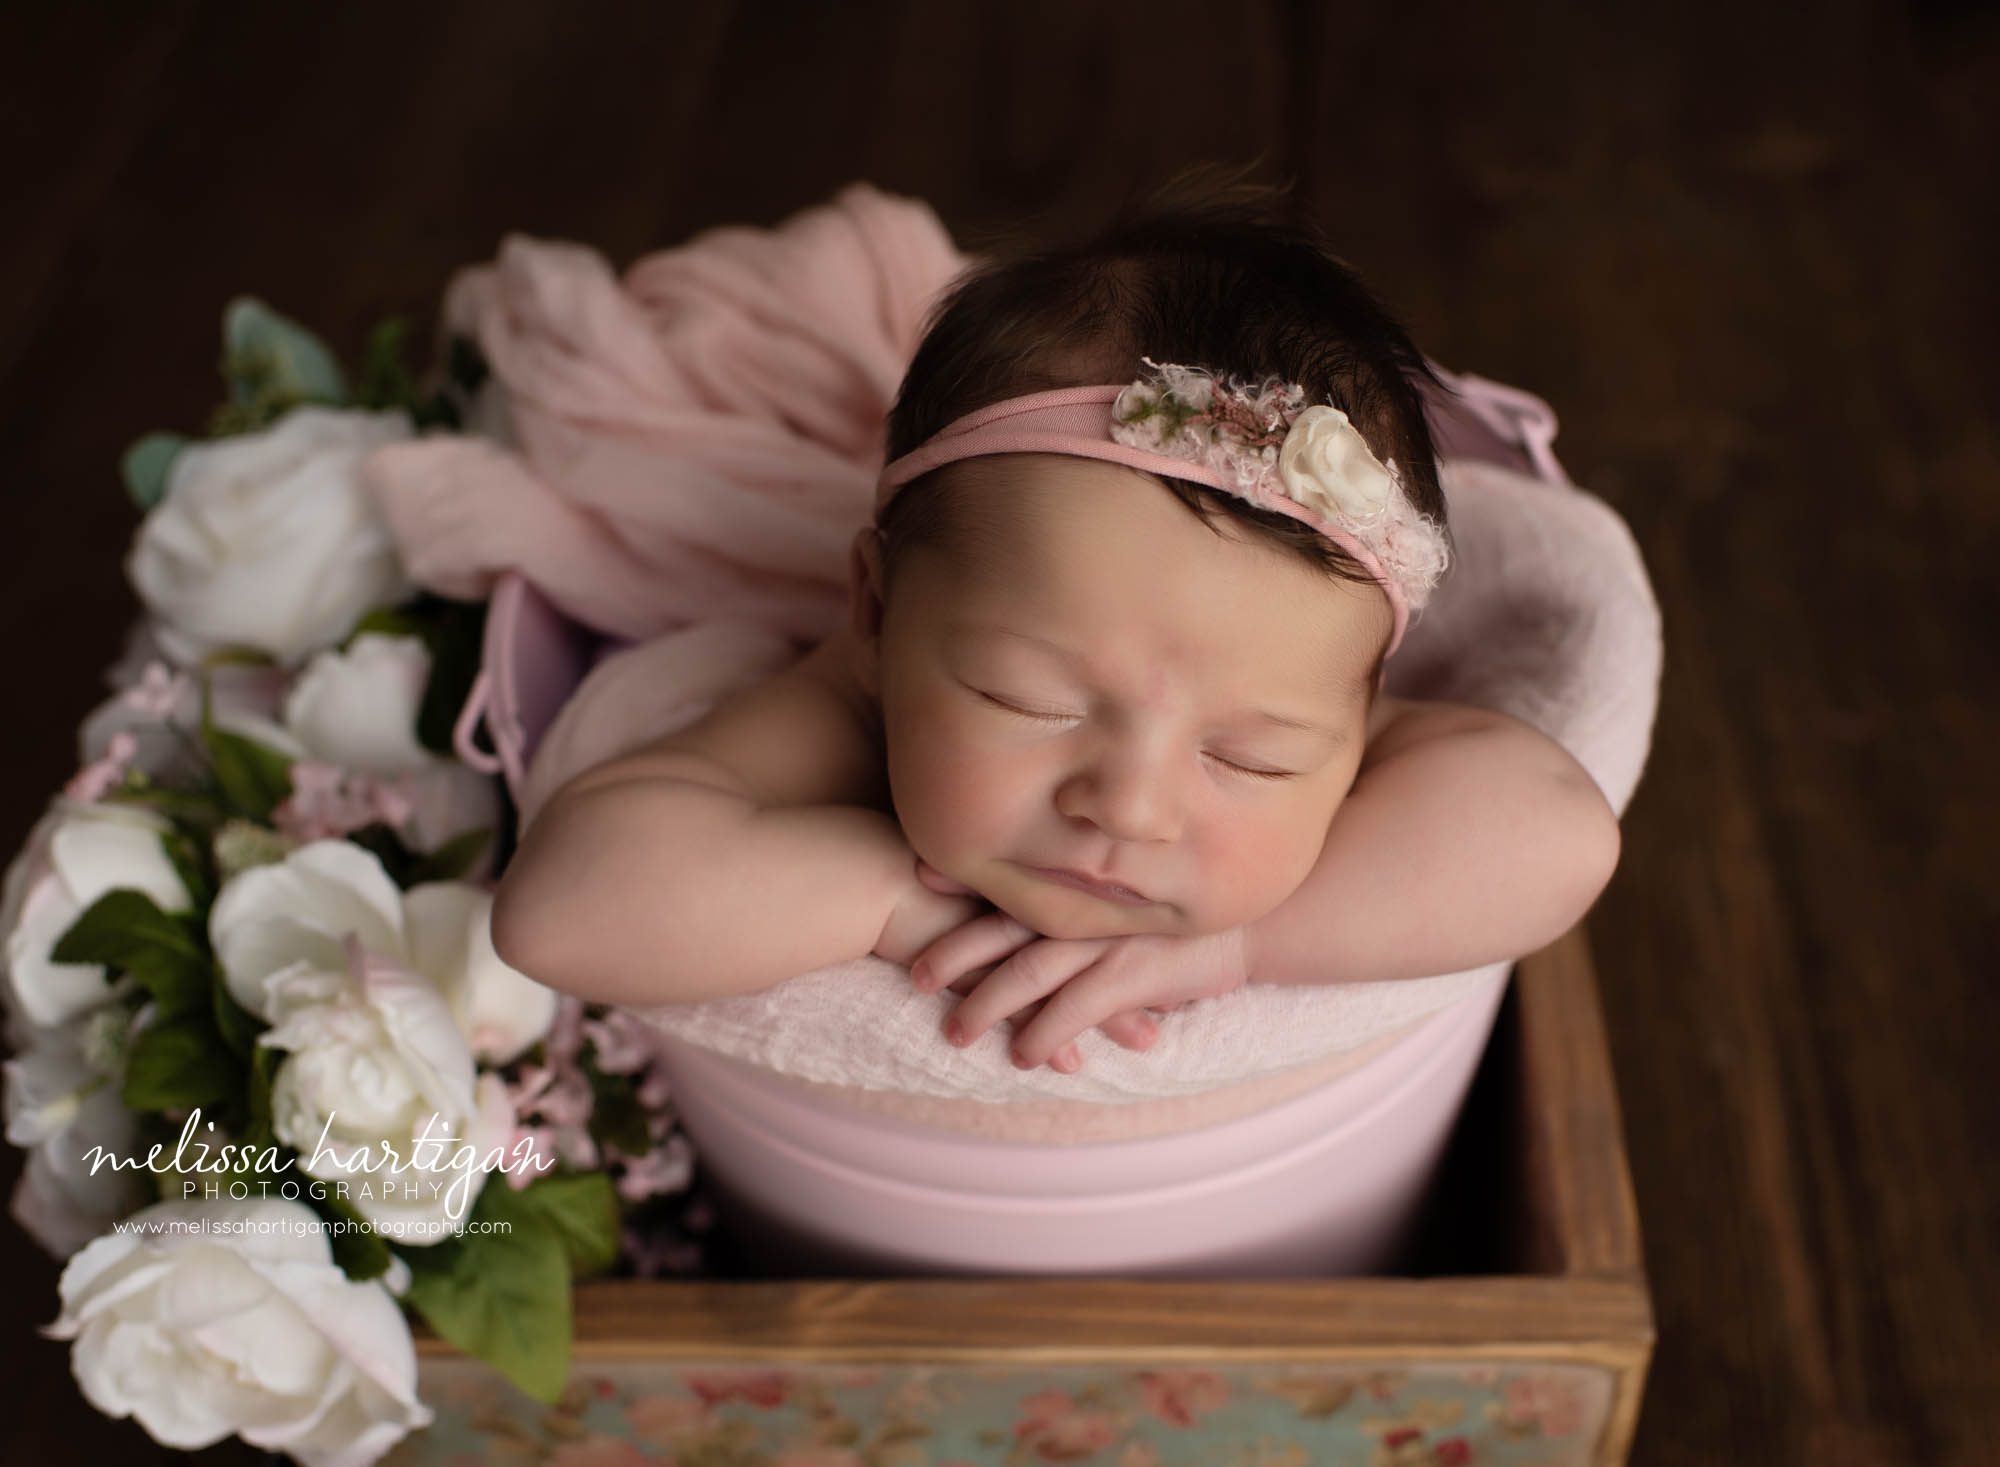 newborn baby girl posed with chin on hands in pink metal bucket inside wooden box with pink wrap draped over baby and white flower stems hartford County Newborn Photographer